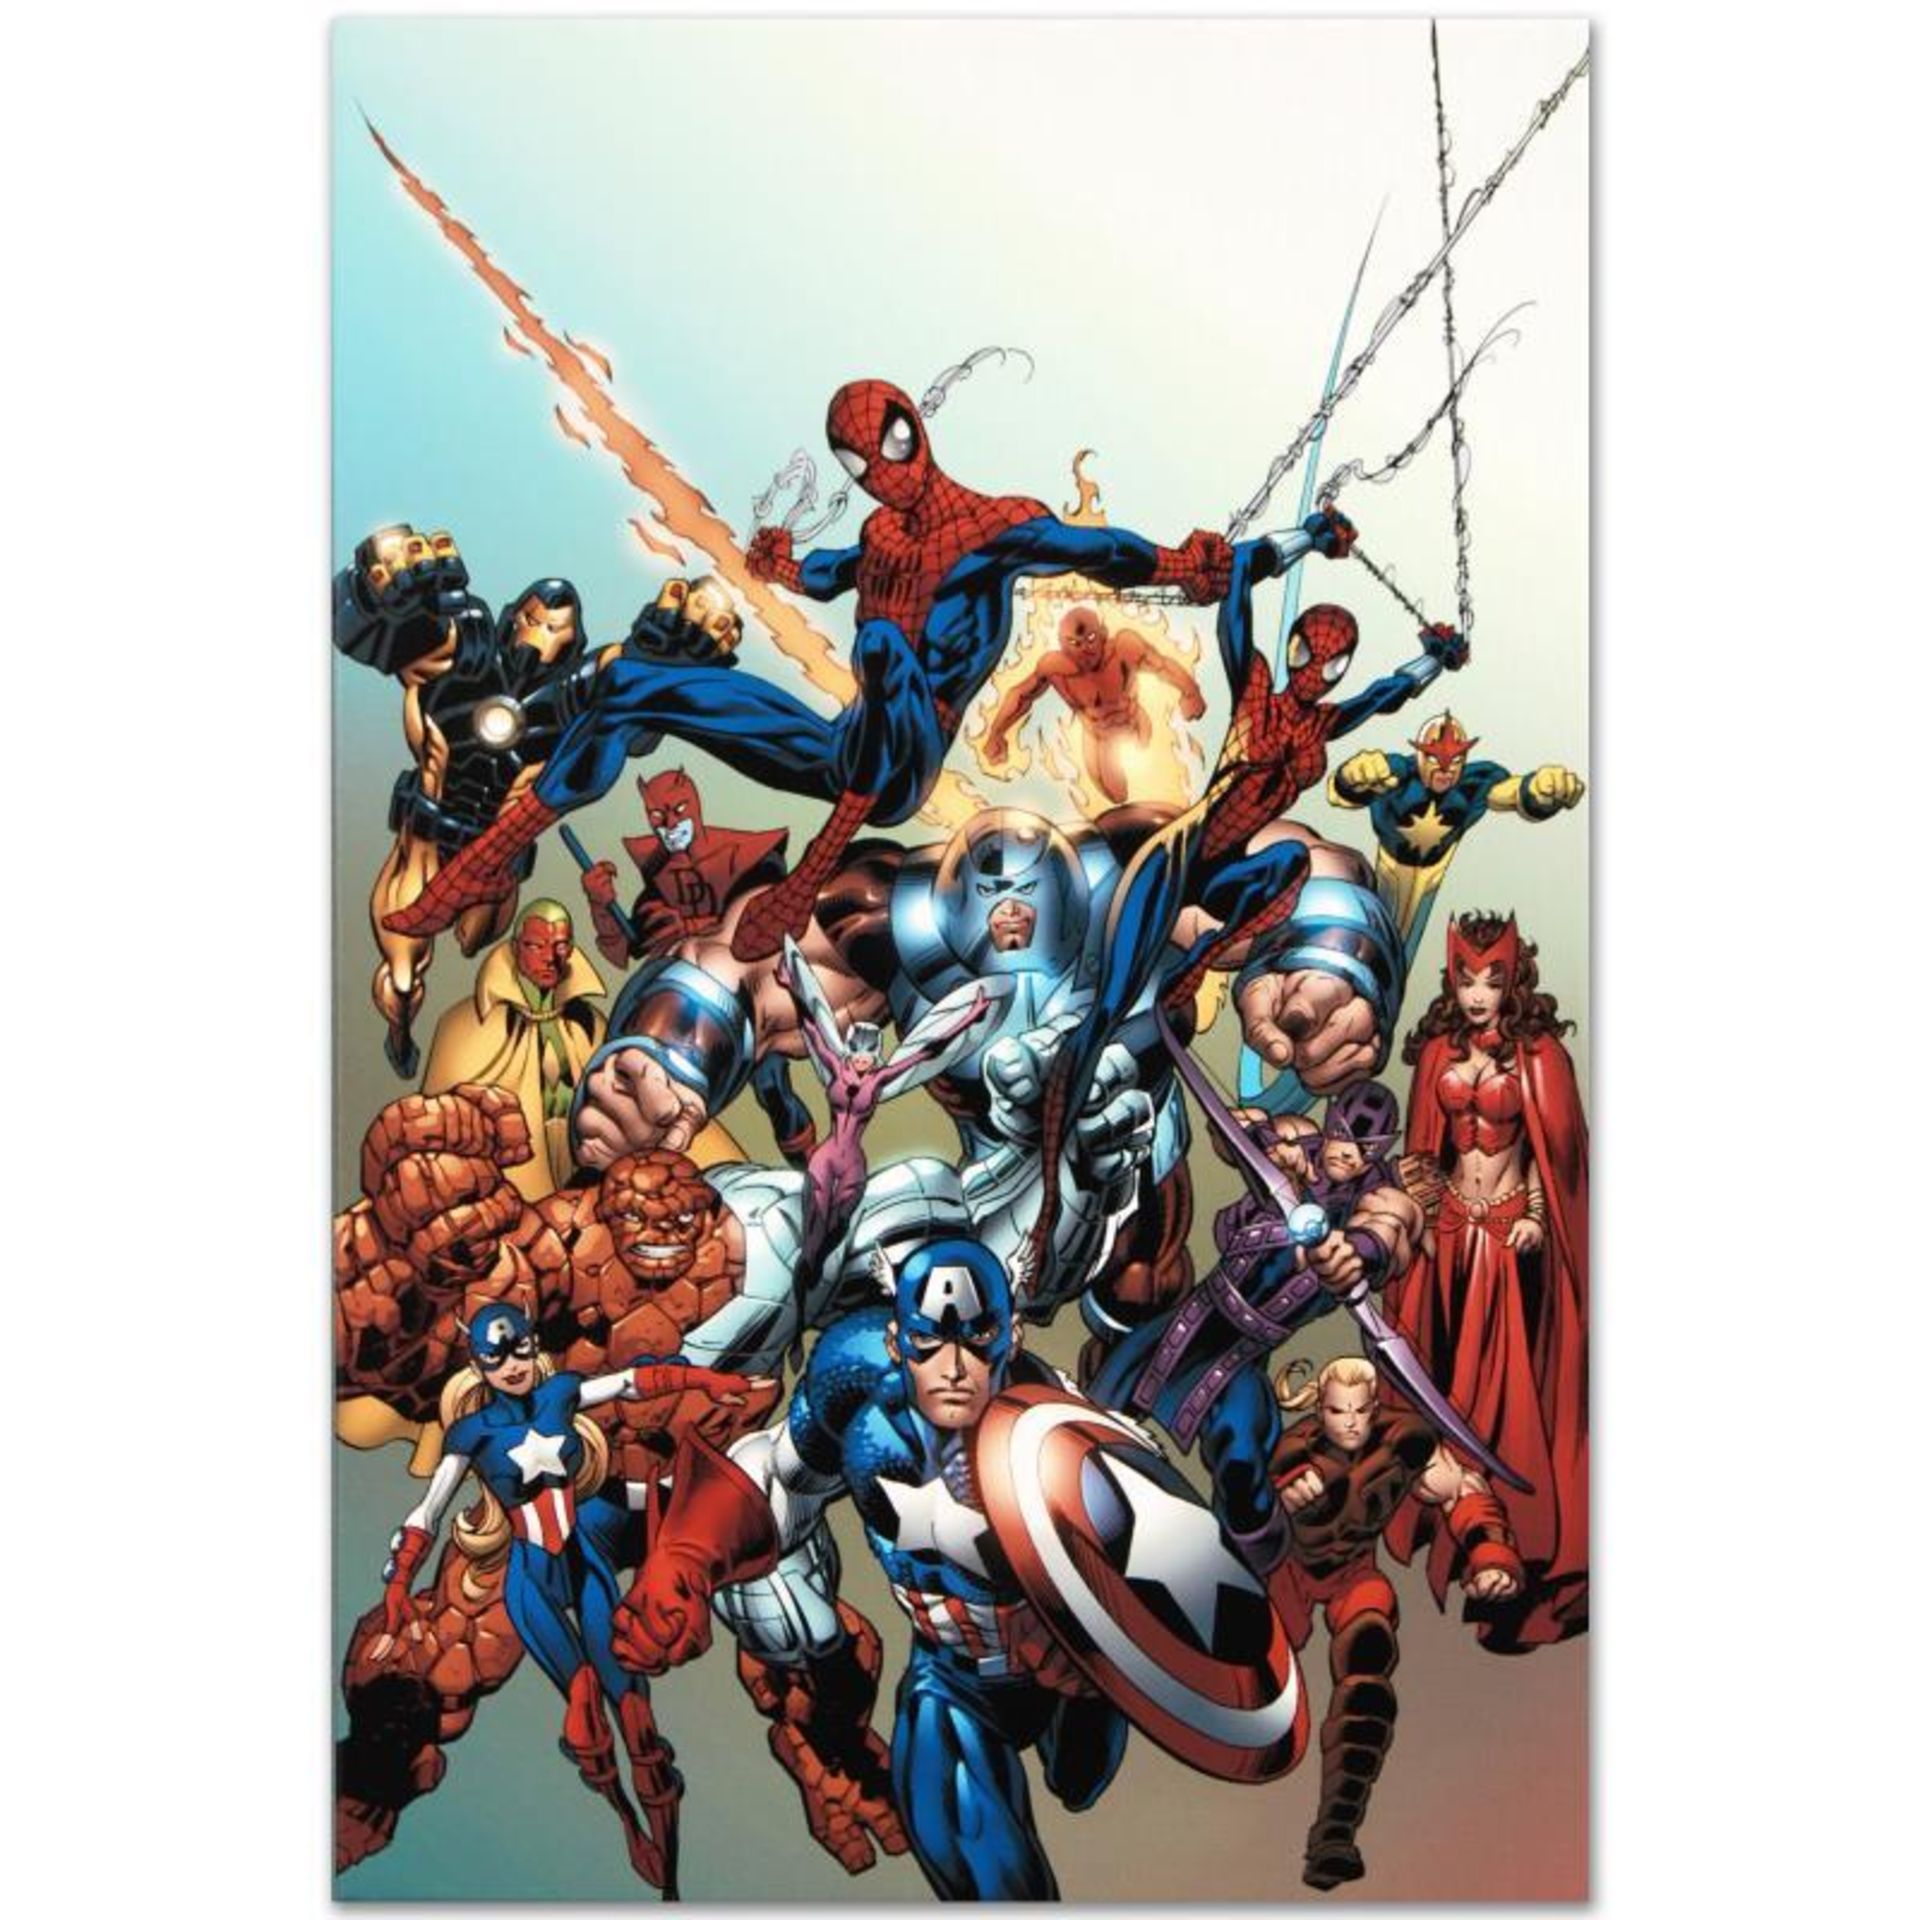 Marvel Comics "Last Hero Standing #1" Numbered Limited Edition Giclee on Canvas